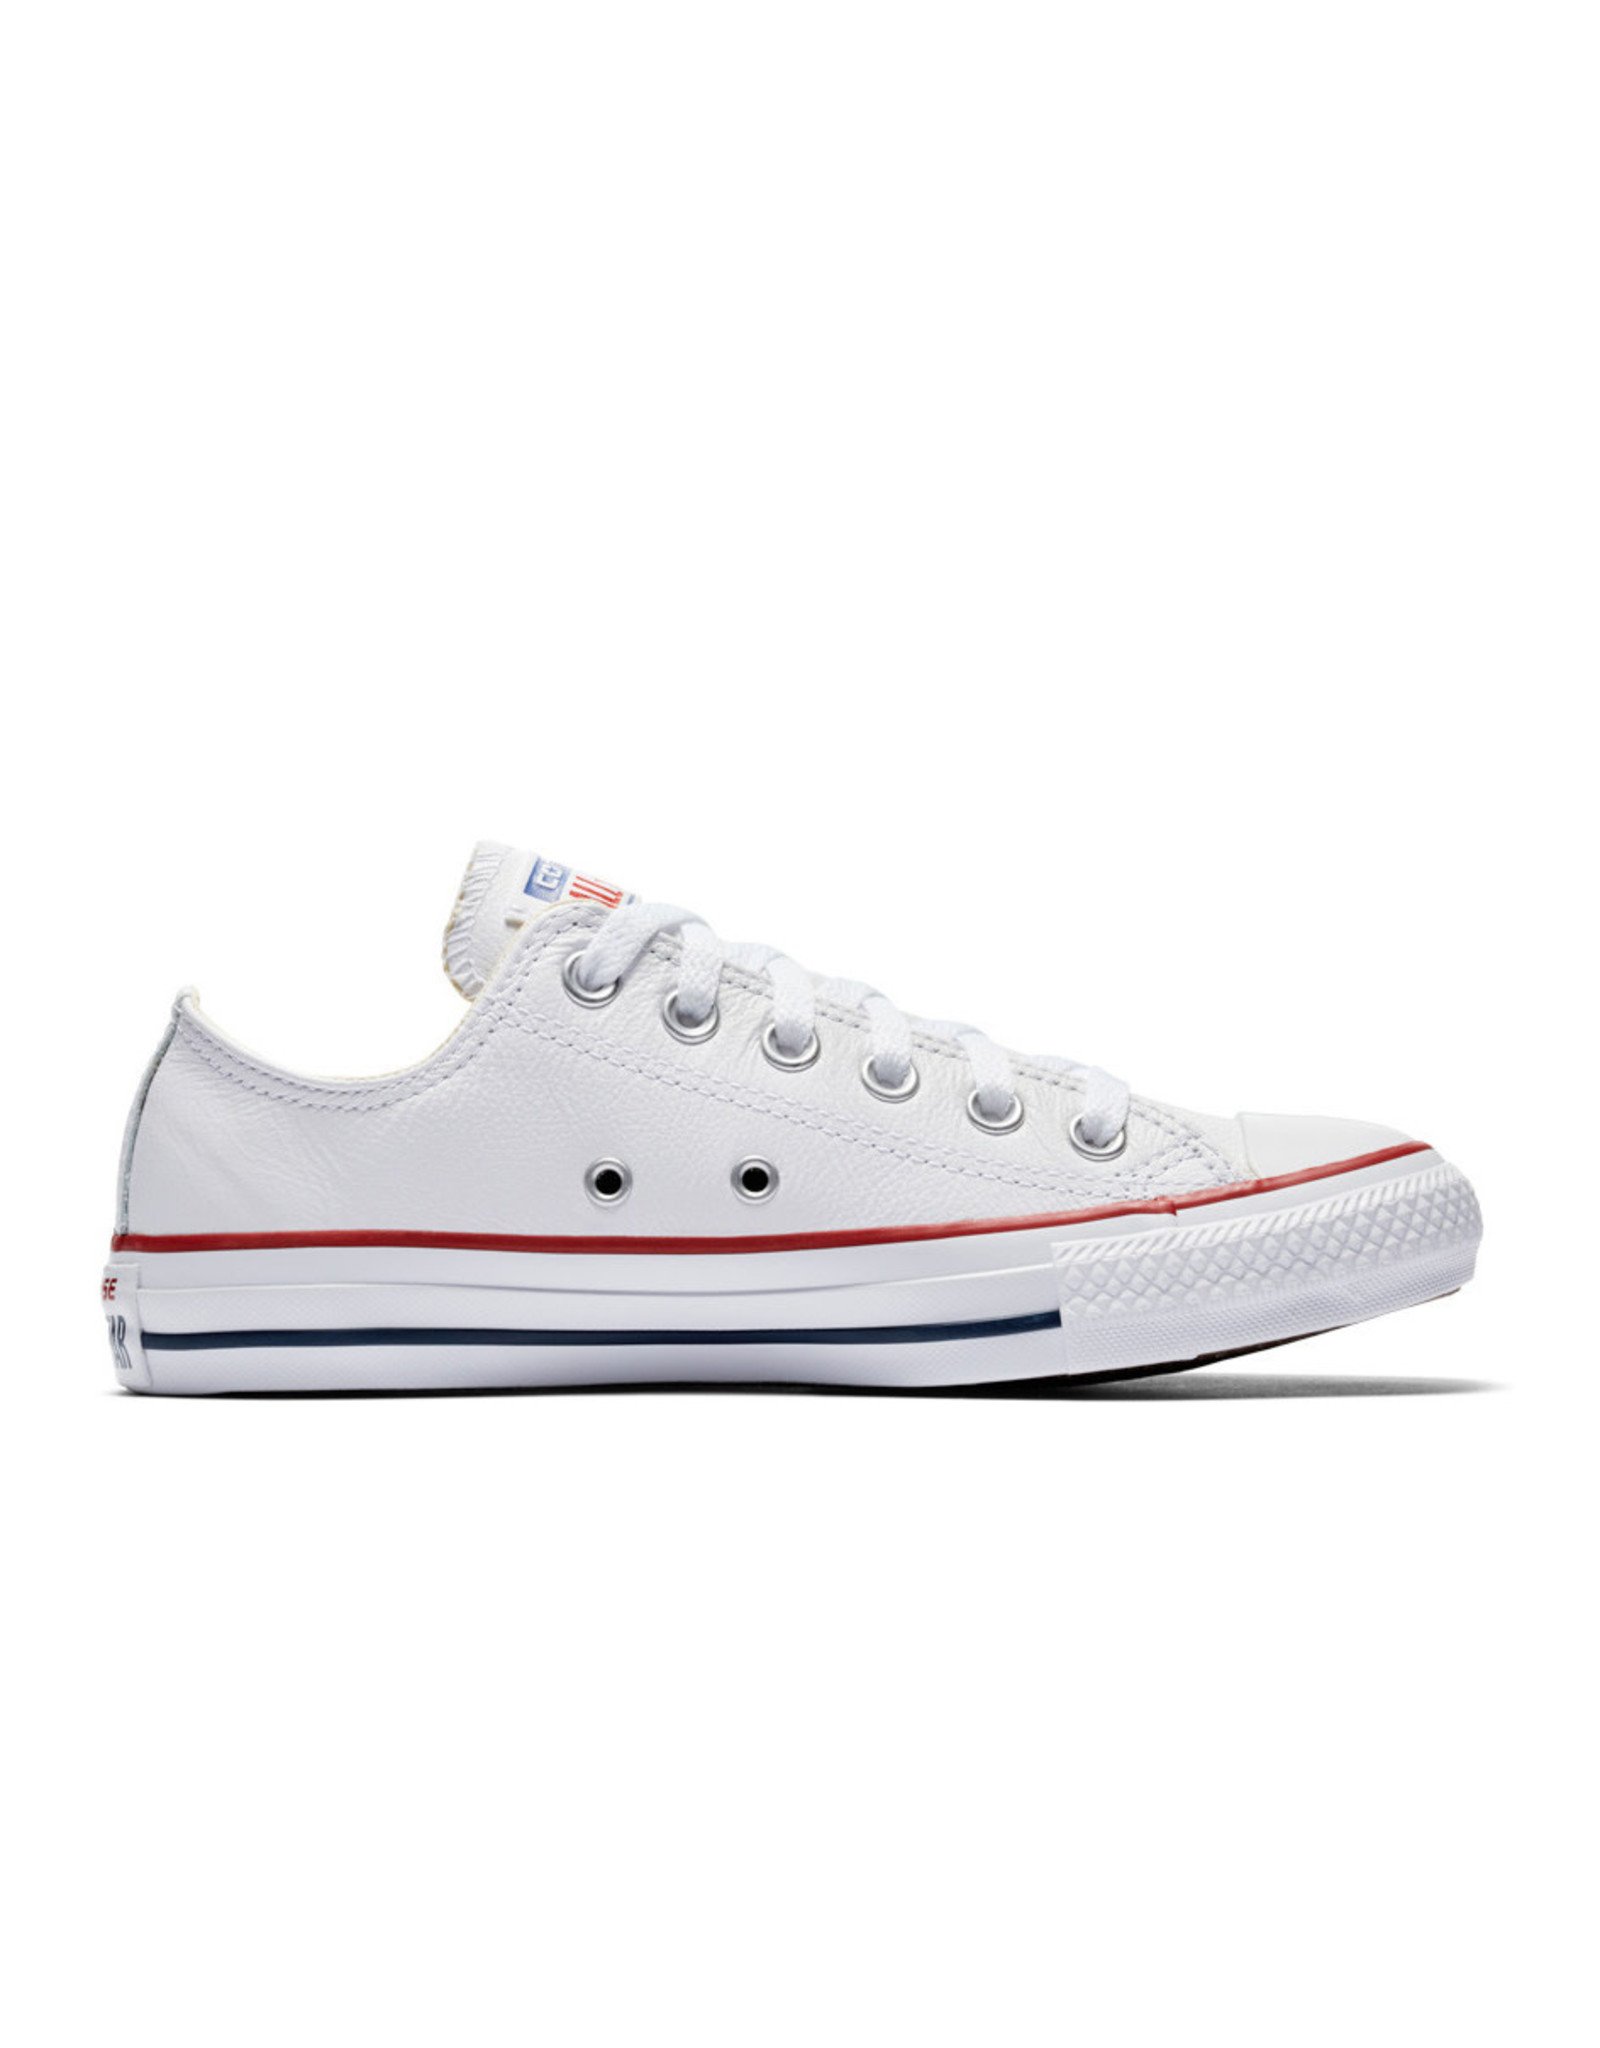 CONVERSE CHUCK TAYLOR OX LEATHER WHITE CC2OP-132173C